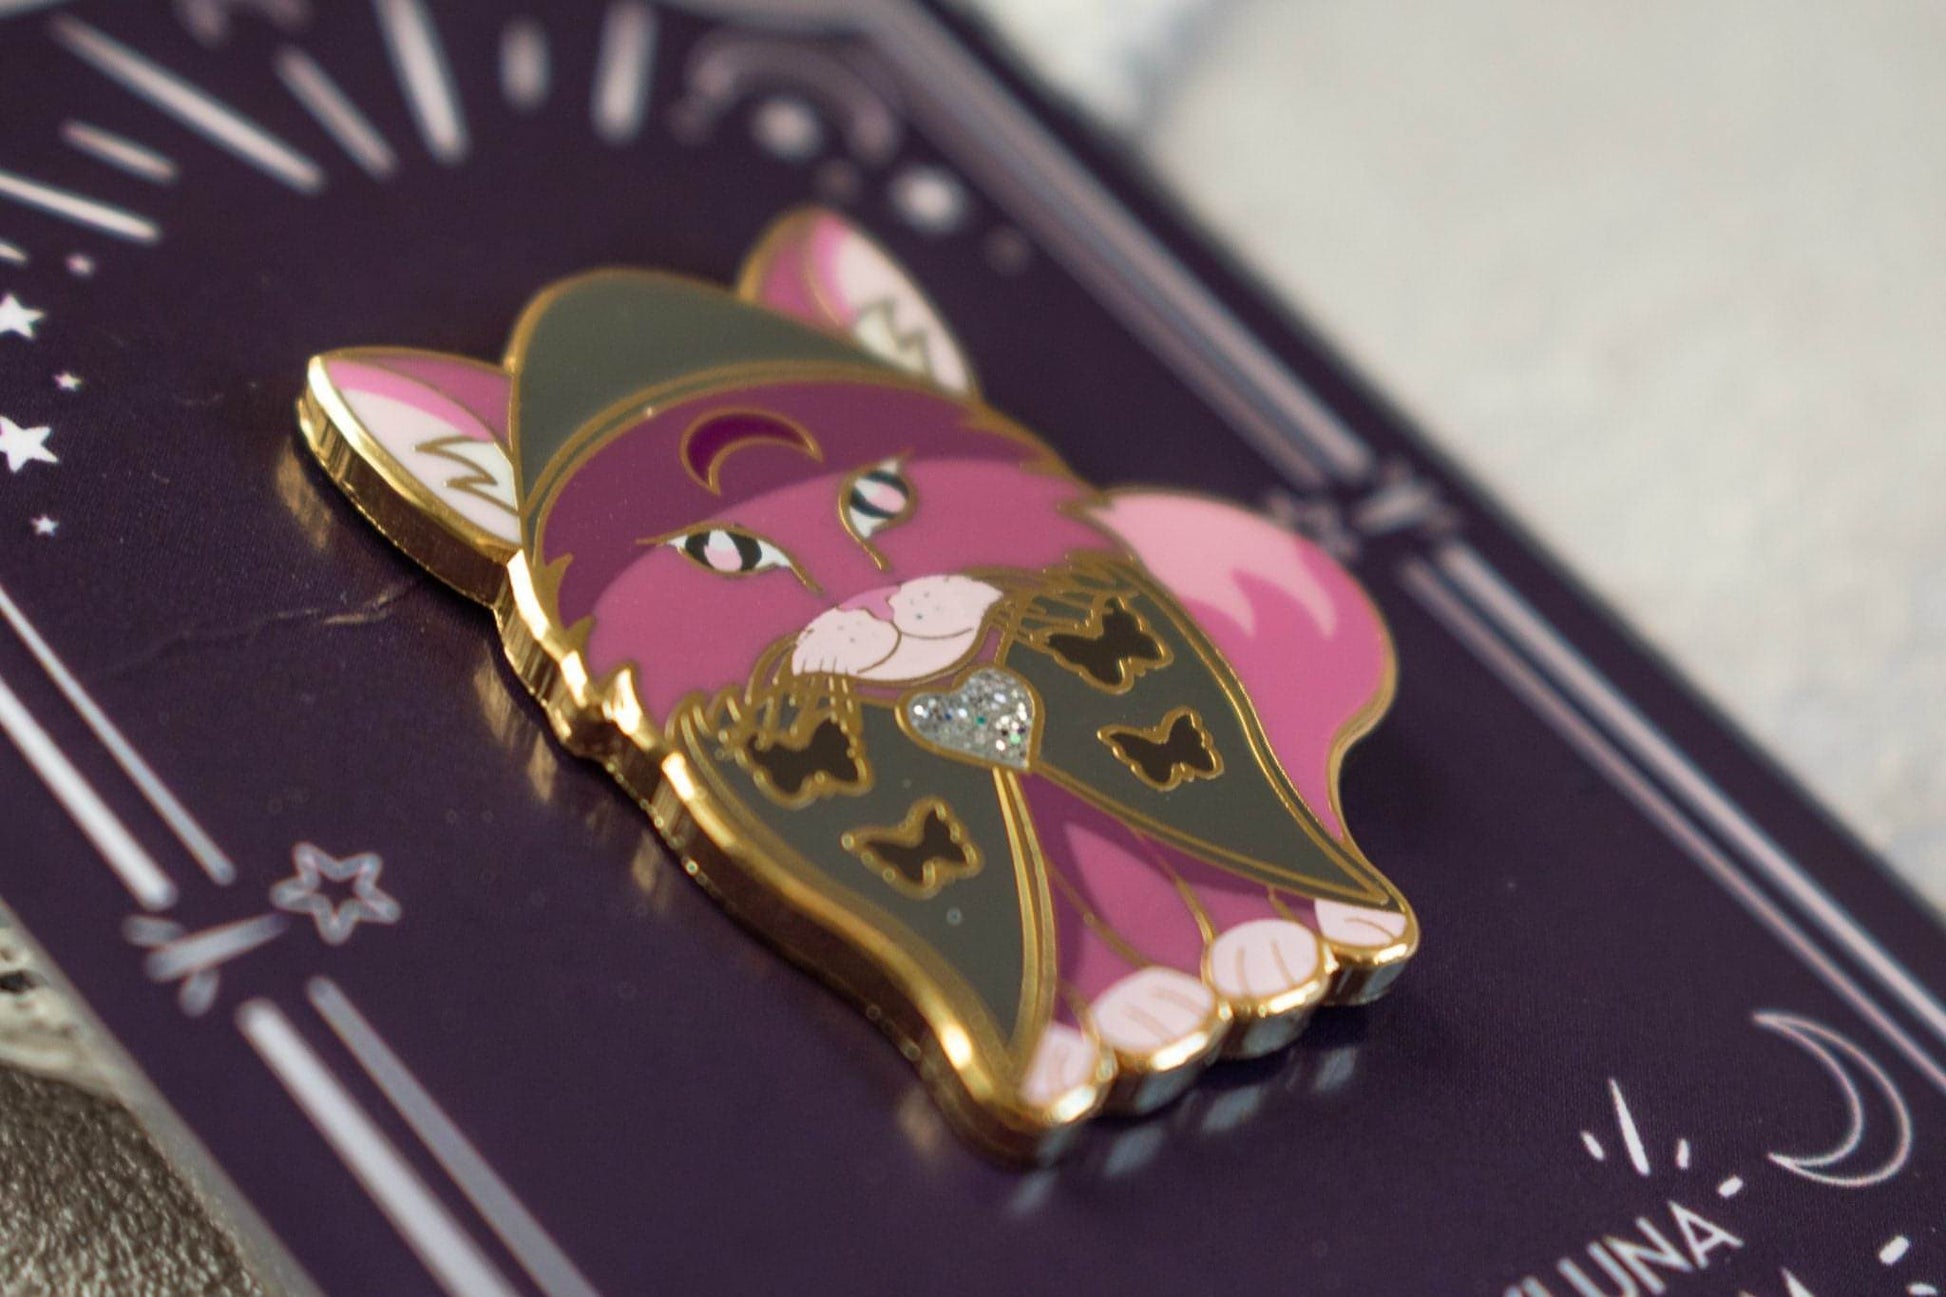 A close up shot of the cat pin shows the small bits of glitter in the hart brooch and also the quality of the screenprinted face and eyes. The cat has darker grey enamel butterflies on its cape.